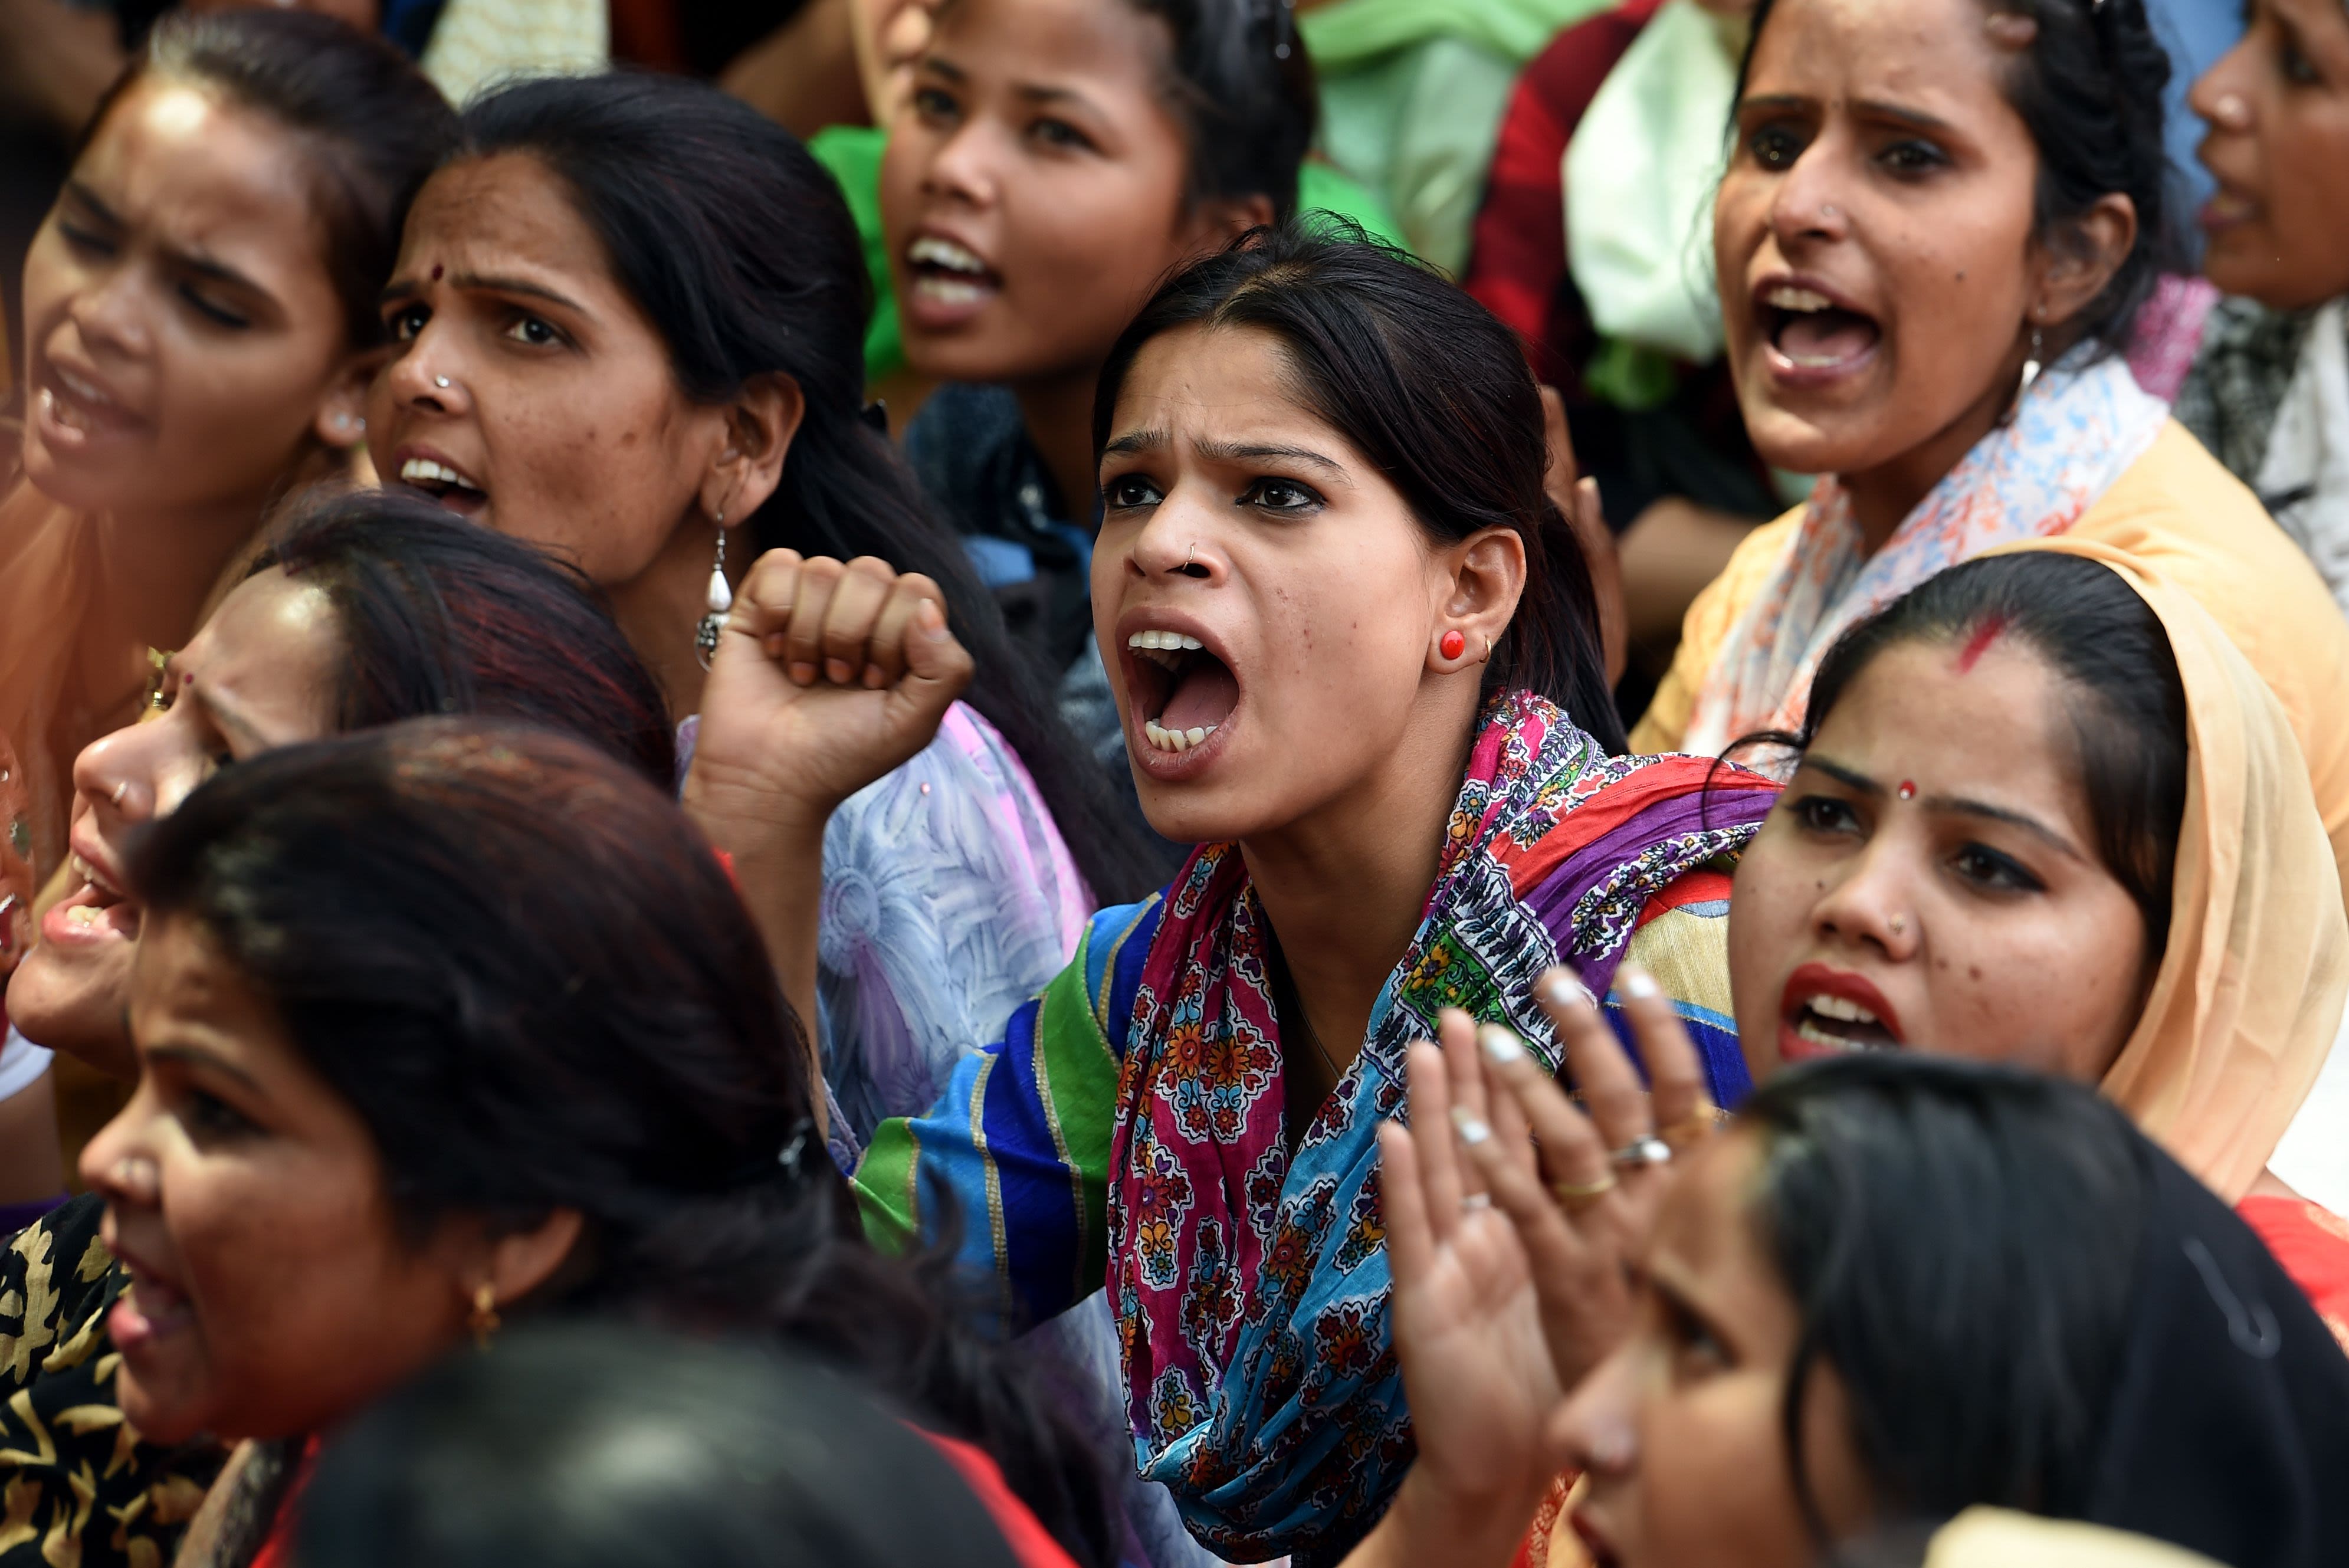 India rape case: rape of 8-year-old in Northern India inflames religious  tensions | CNN